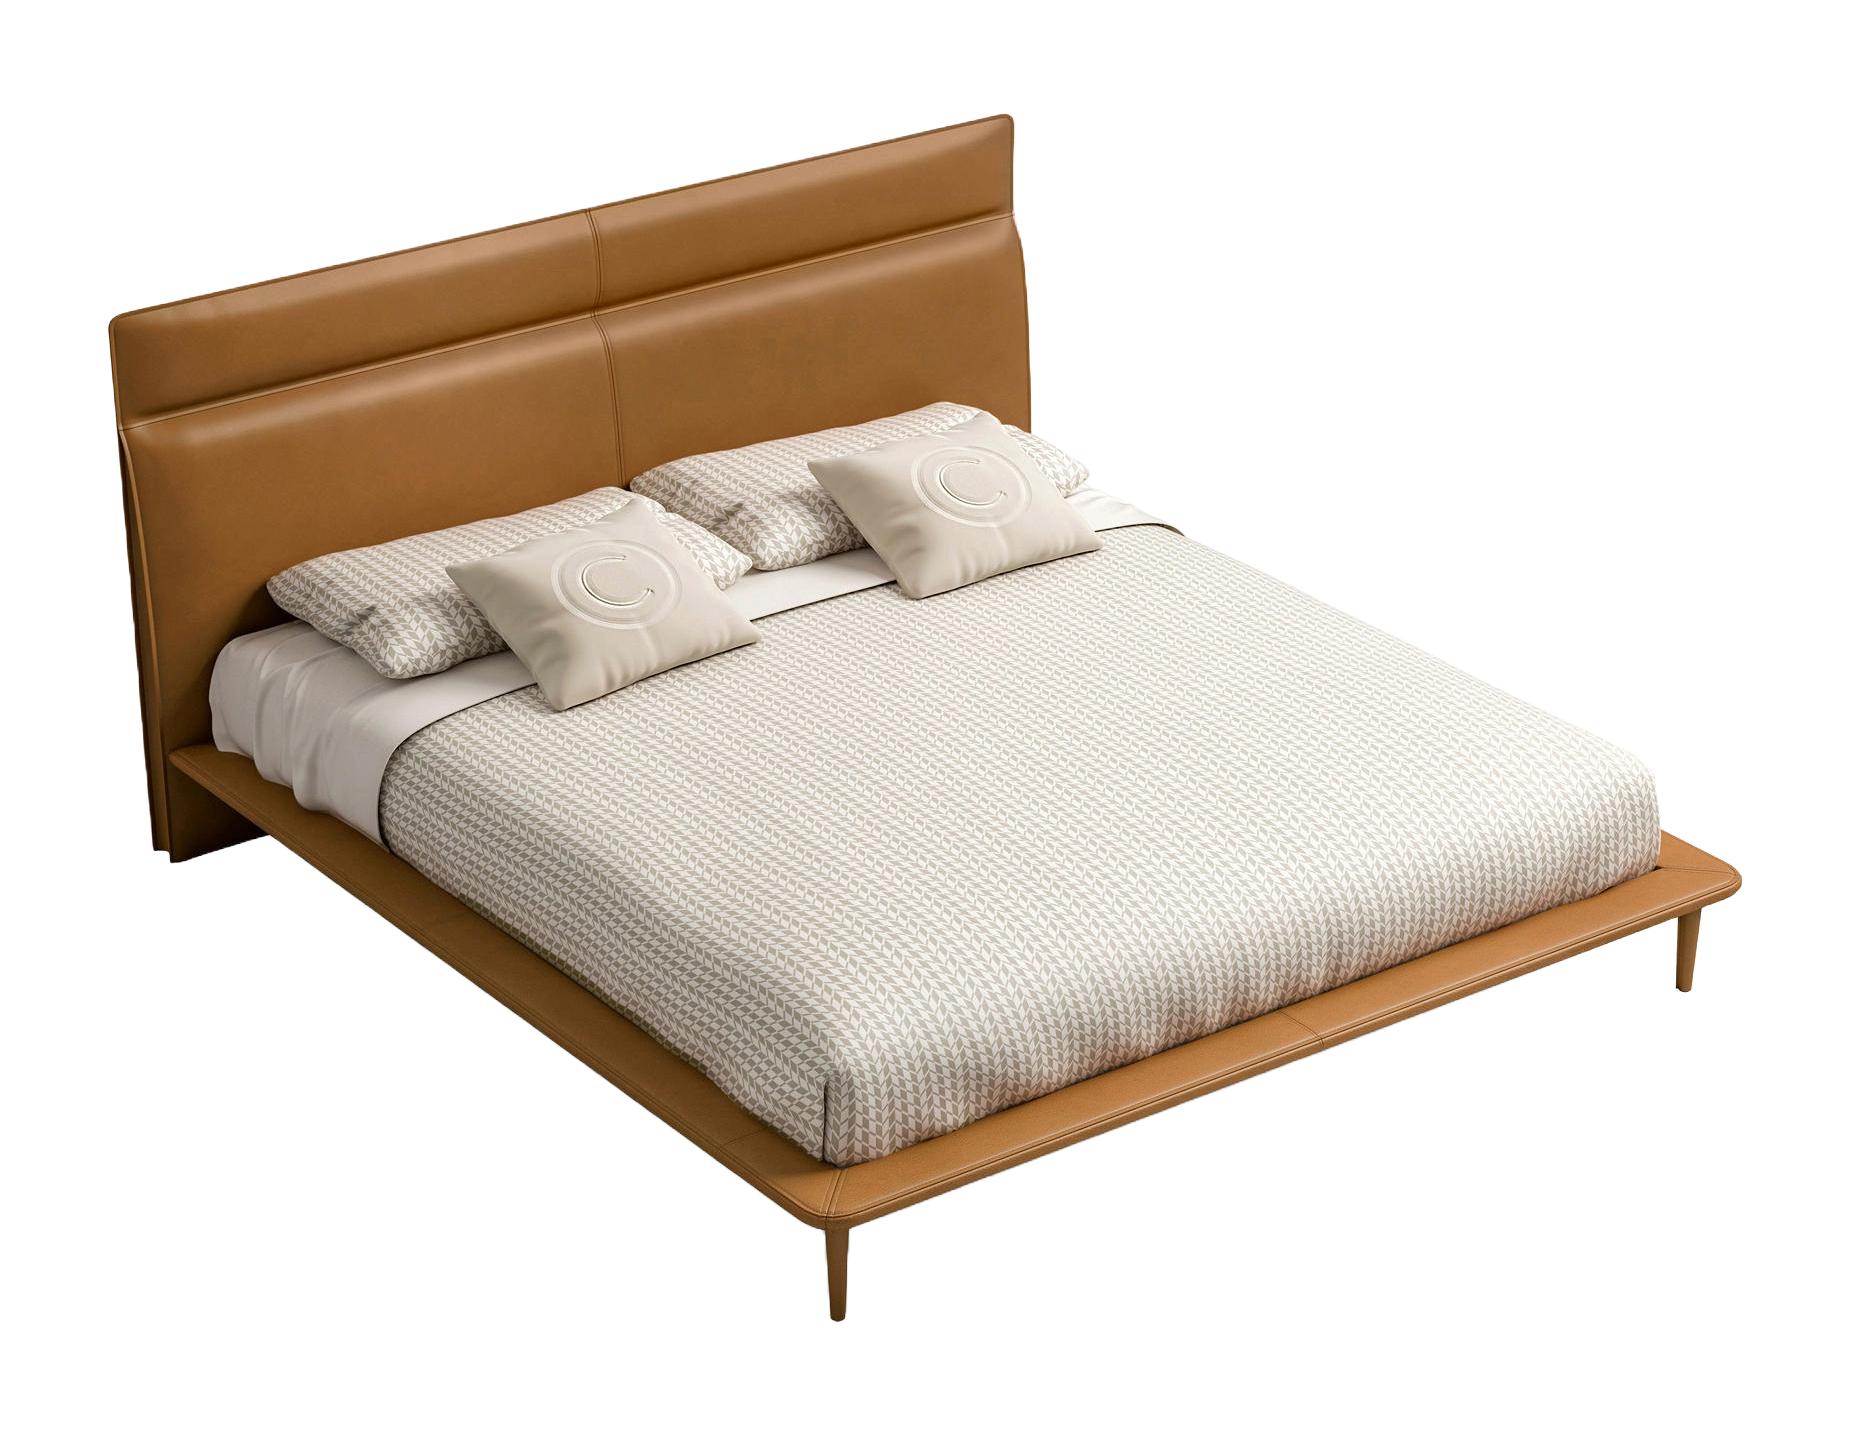 Modern Leather Bed ☞ Size: 155 x 200 cm